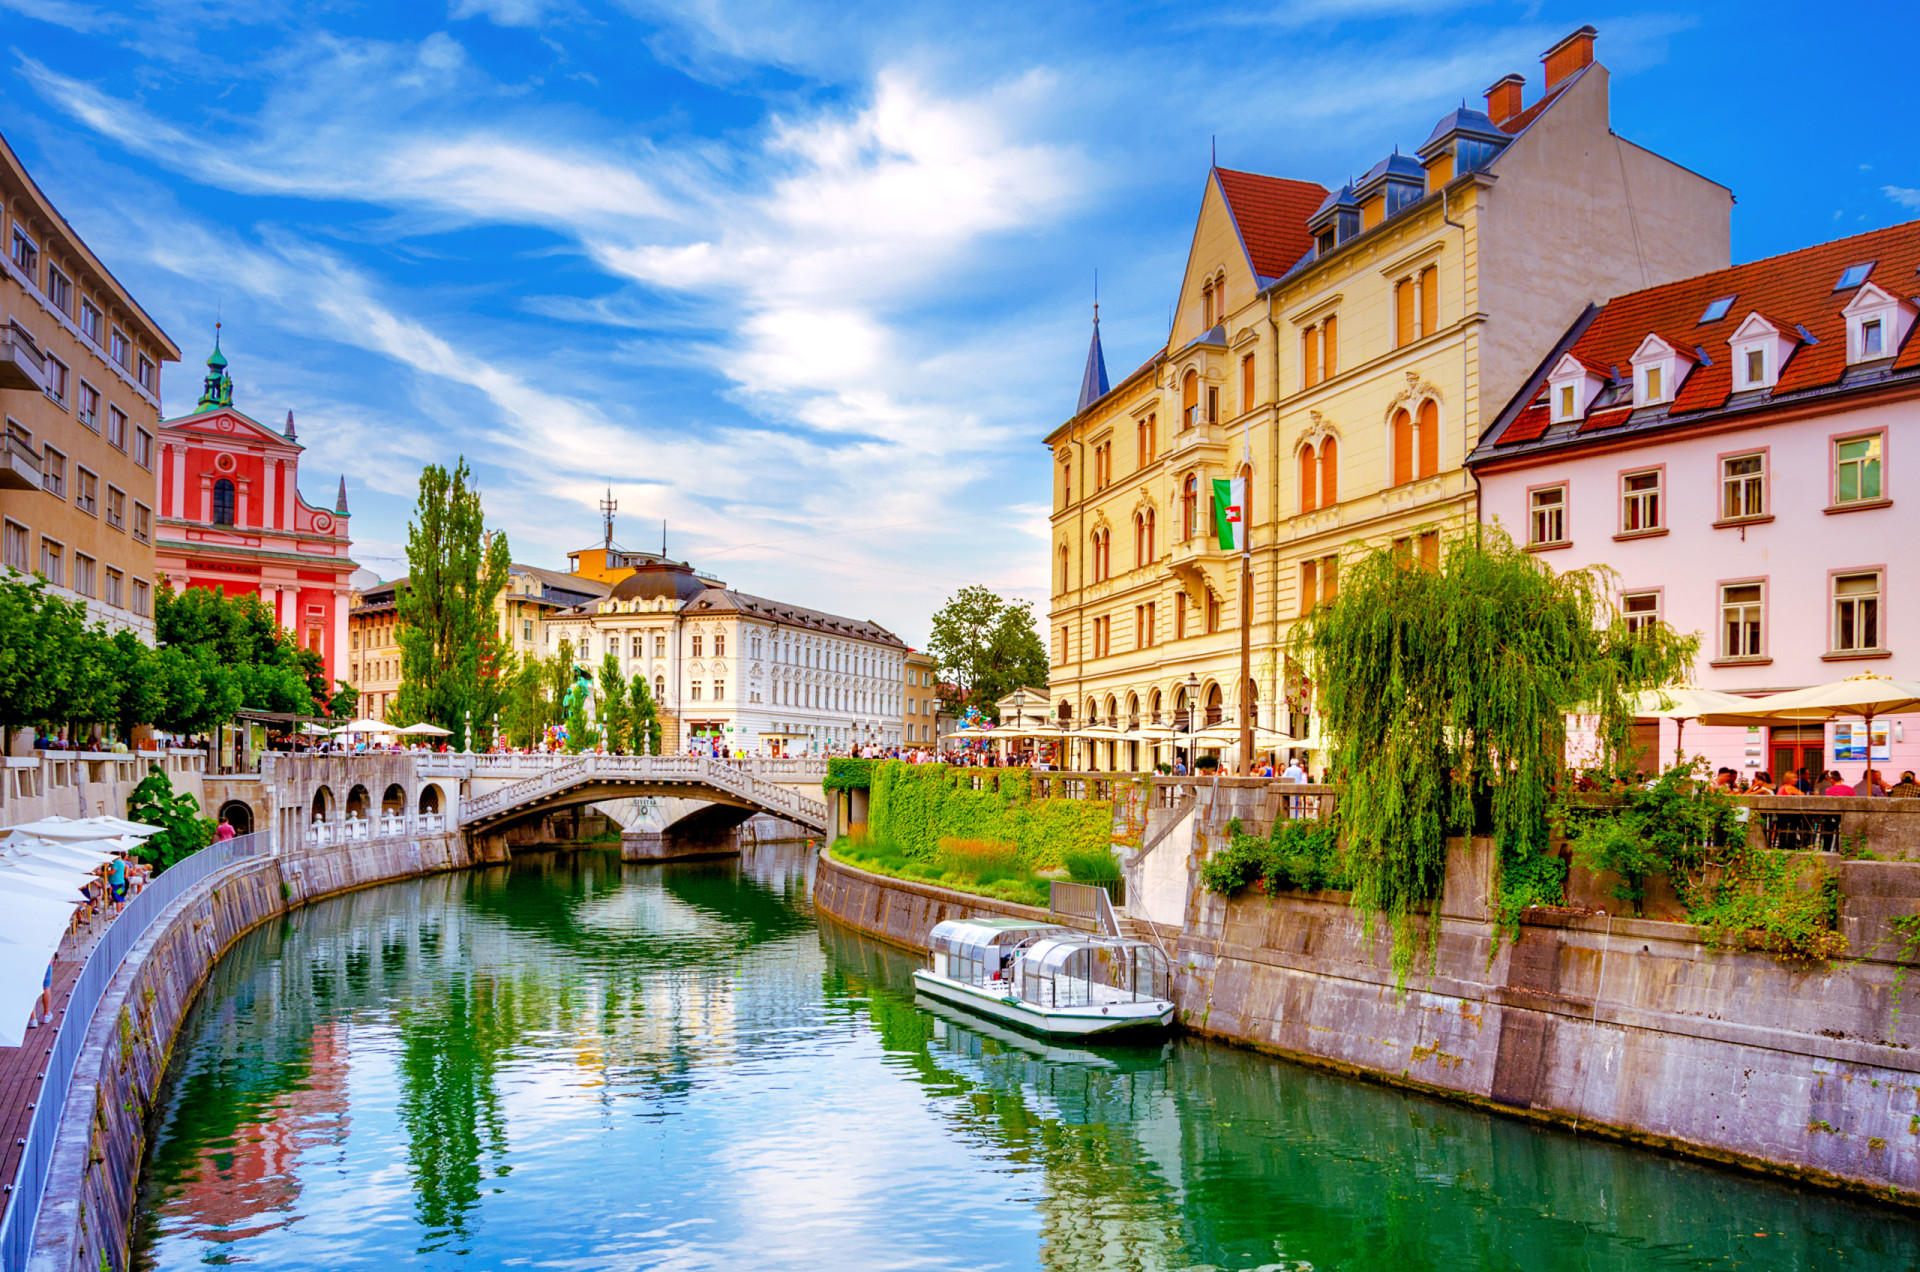 <p>Slovenia bases its tax on location and hotel rating. In larger cities and resorts, such as Ljubljana and Bled, the fee is higher and only around €3 (US$3.40) per night.</p><p>You may also like:<a href="https://www.starsinsider.com/n/367241?utm_source=msn.com&utm_medium=display&utm_campaign=referral_description&utm_content=683460en-ph"> Unmasking the monsters: actors playing cinematic creatures</a></p>